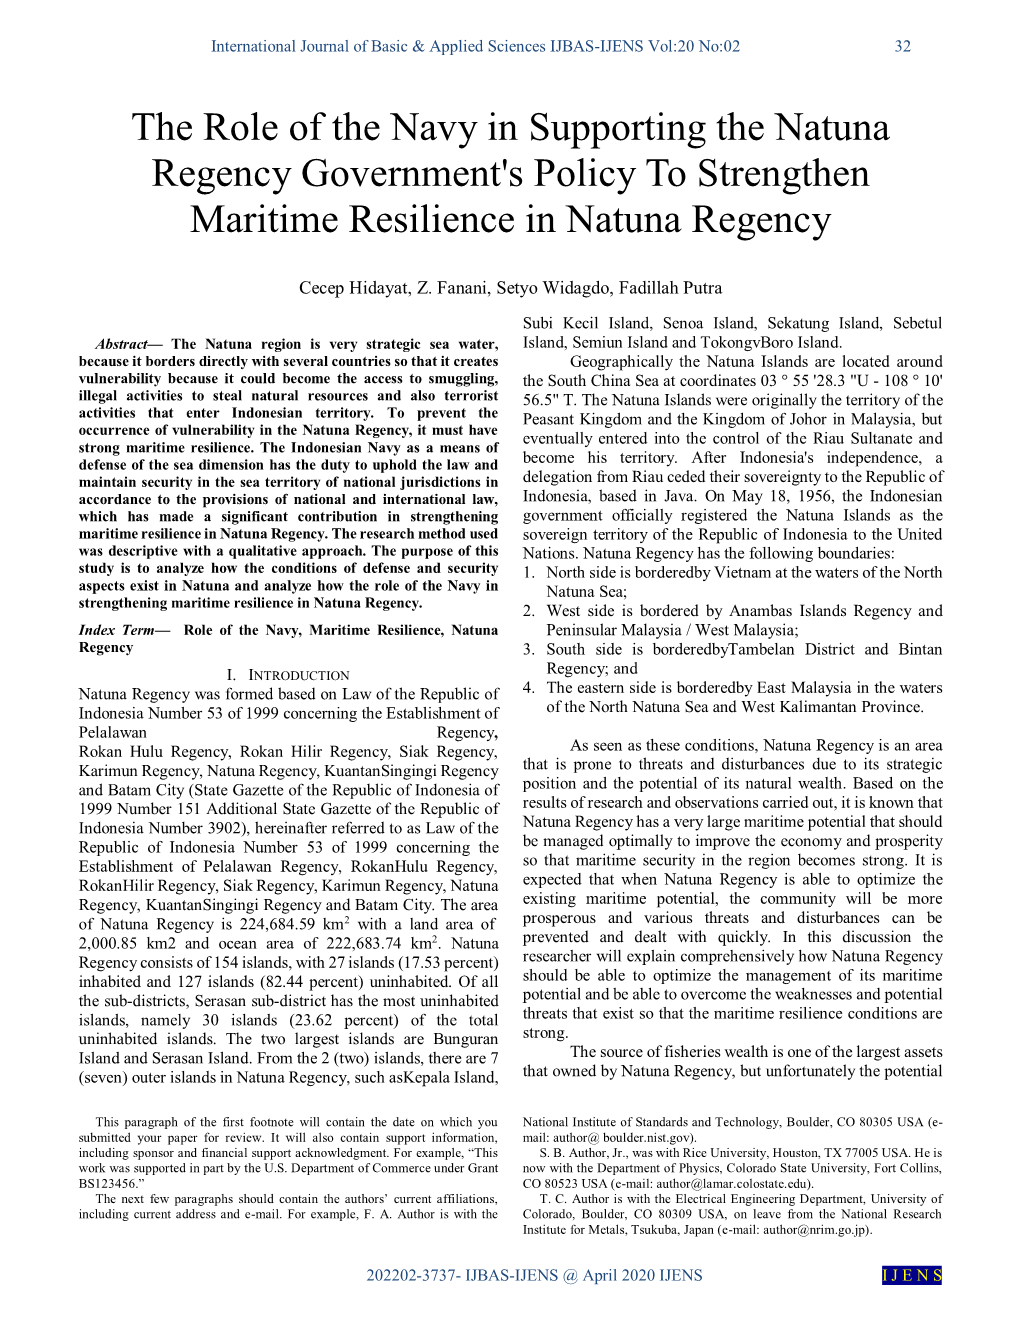 The Role of the Navy in Supporting the Natuna Regency Government's Policy to Strengthen Maritime Resilience in Natuna Regency